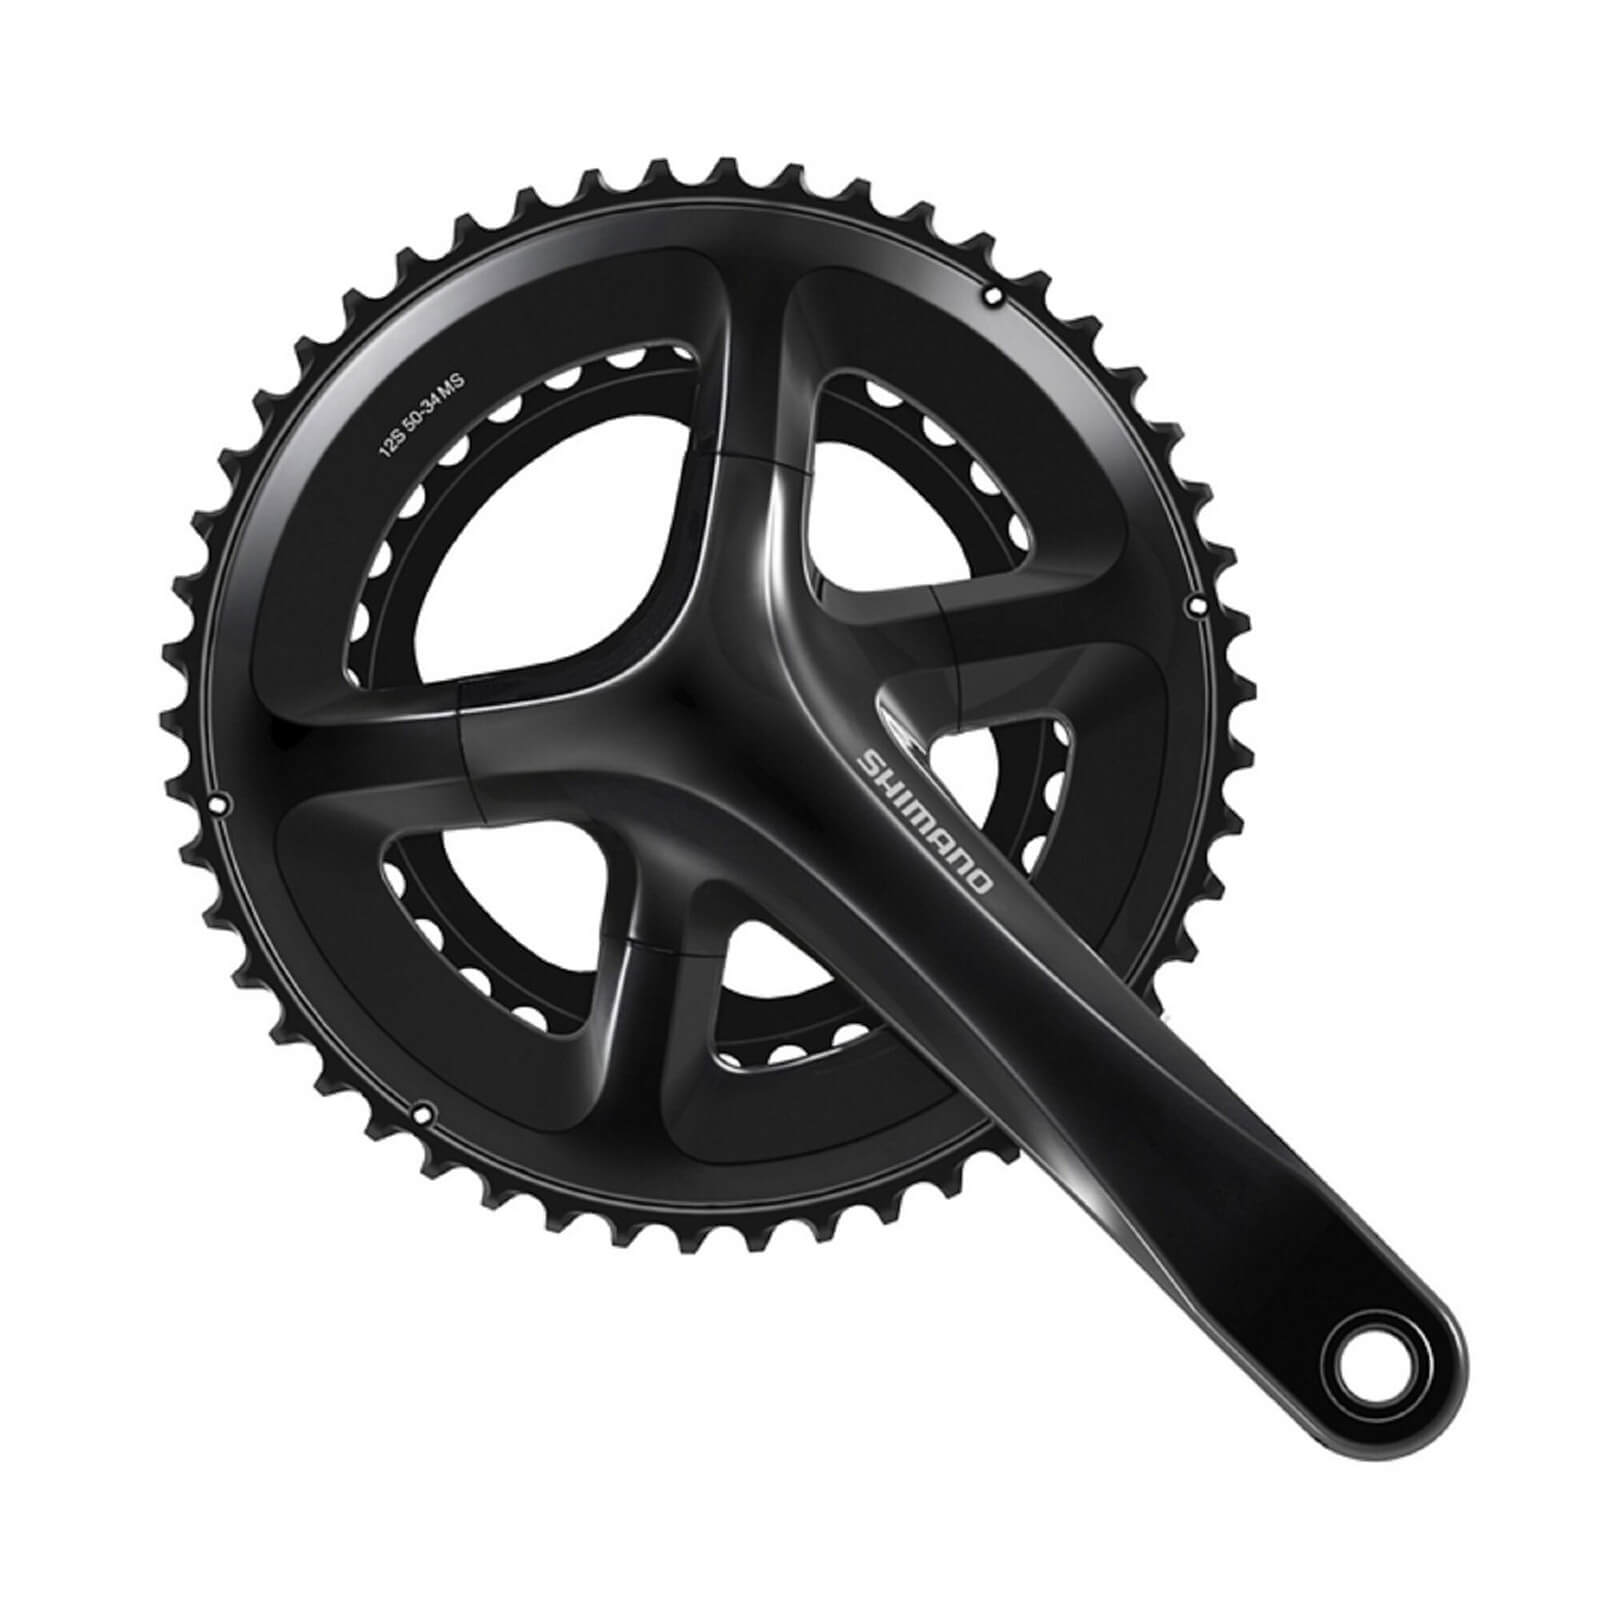 Shimano FC-RS520 12 Speed Chainset - 175mm - 50/34